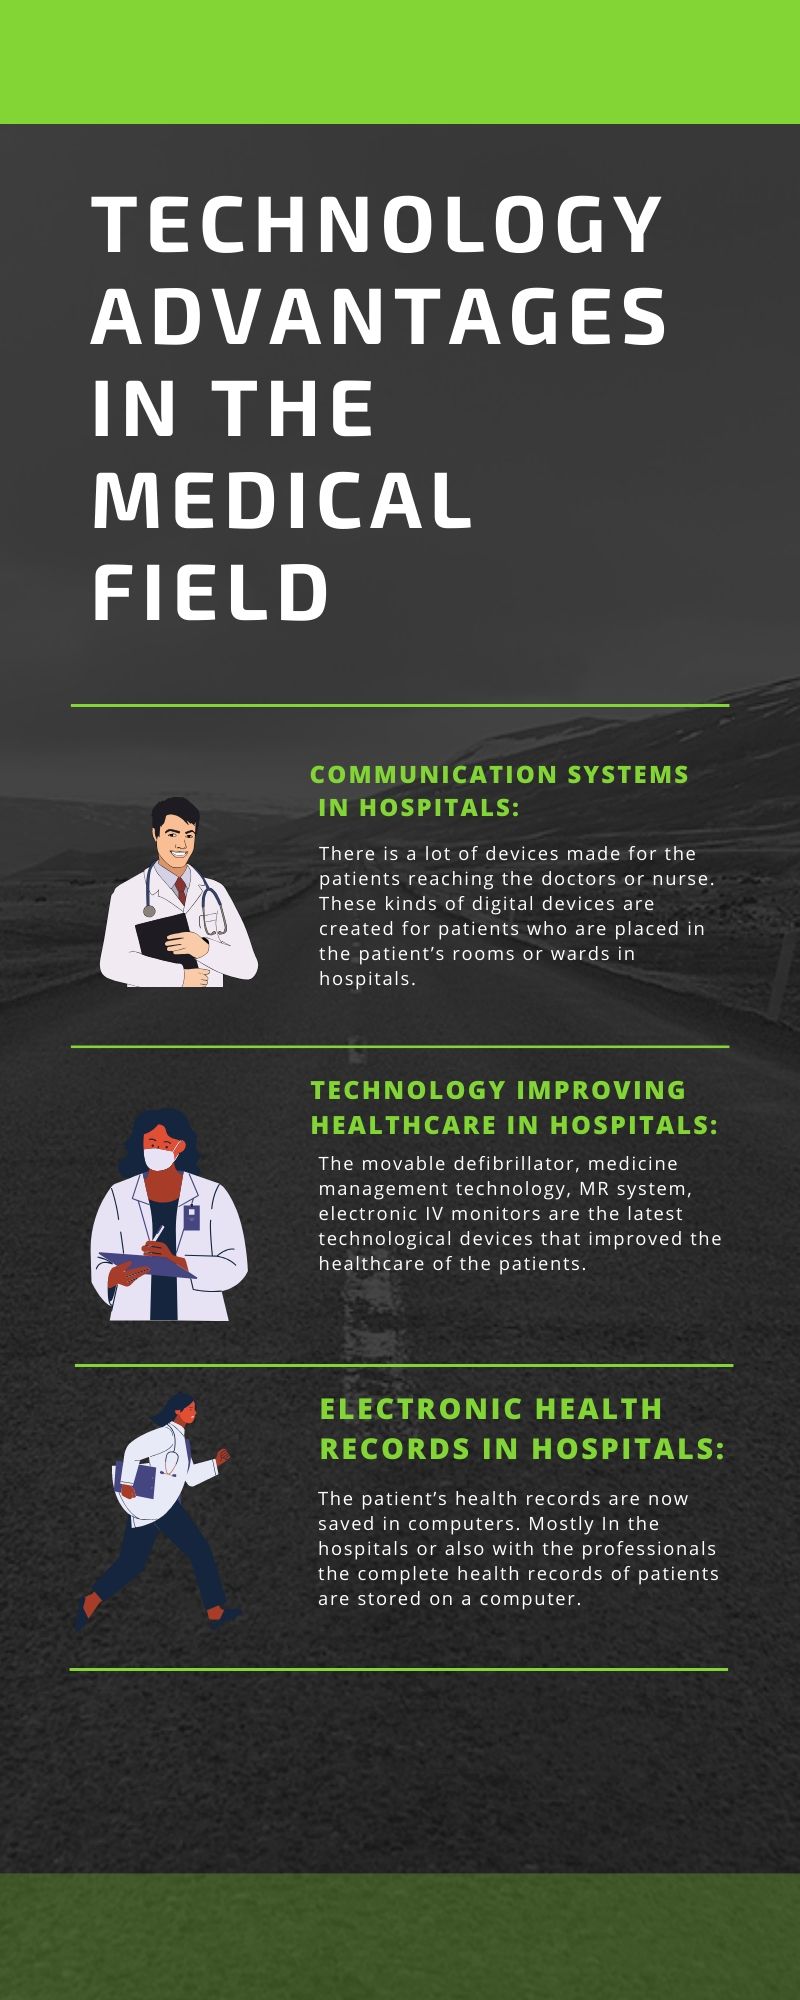 Technology advantages in the medical field